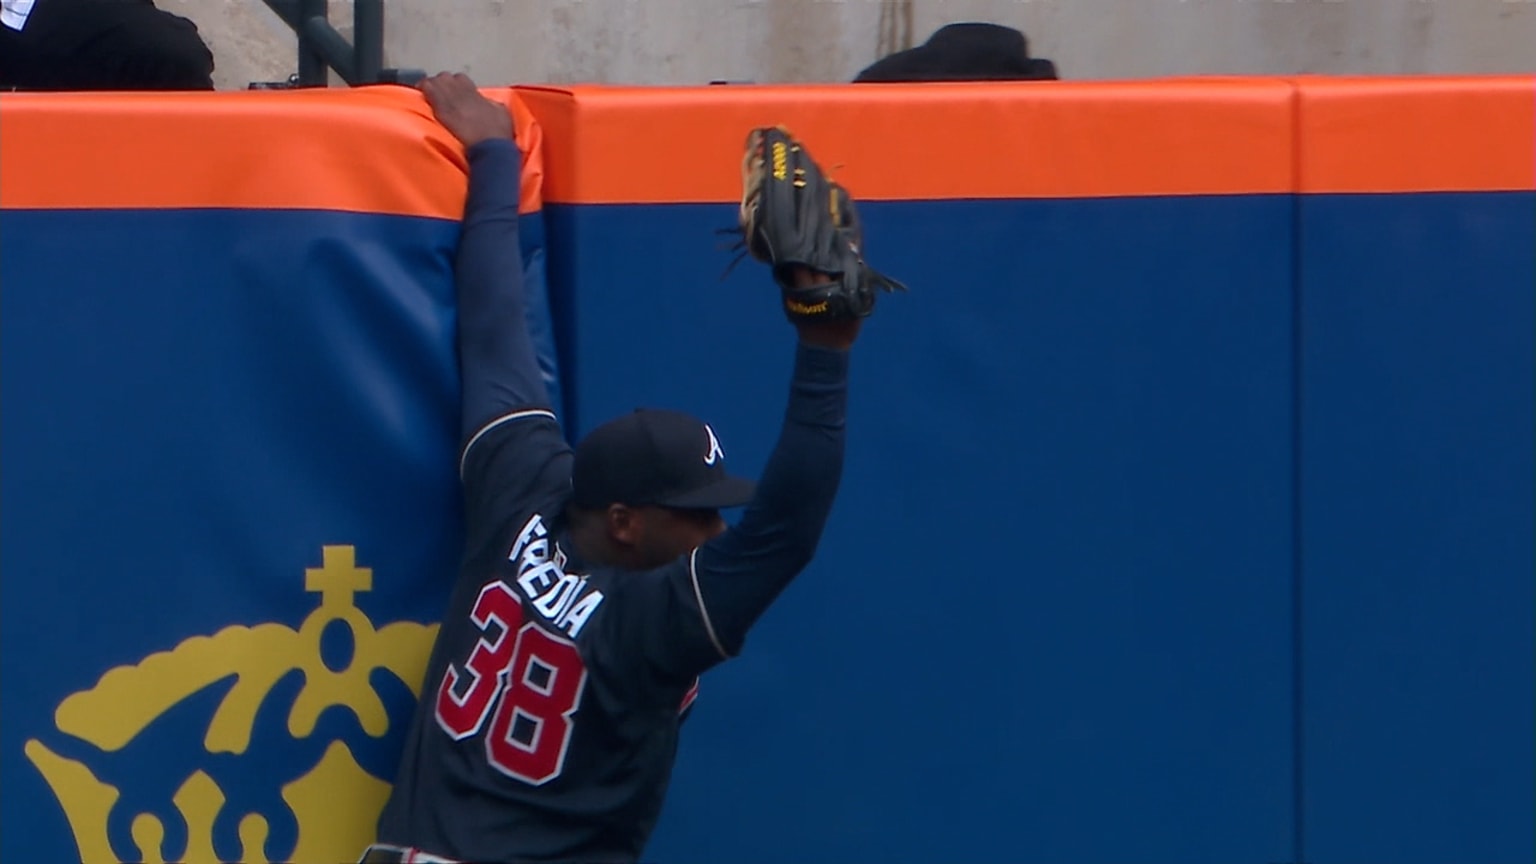 Guillermo Heredia ok after hit by pitch - Battery Power